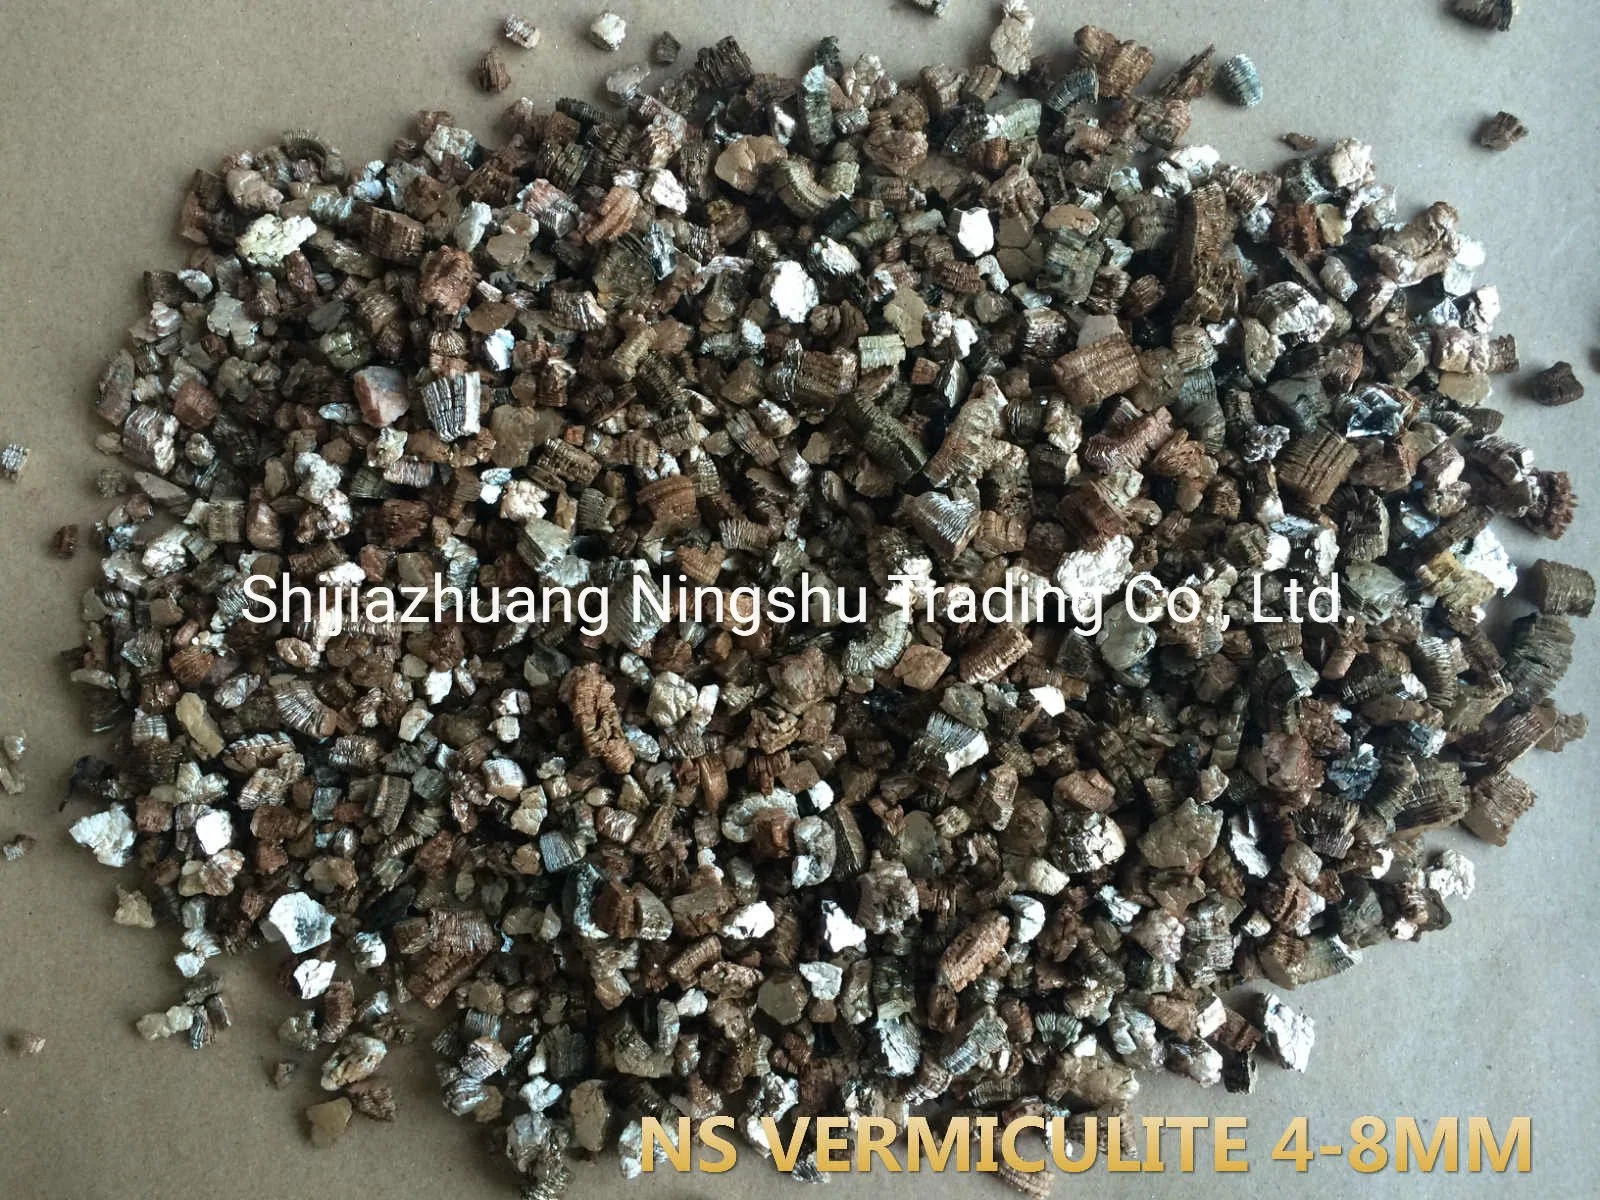 Golden Expansion Vermiculite Used as Steel Mill Slag Remover for Metallurgy Fireproof Construction